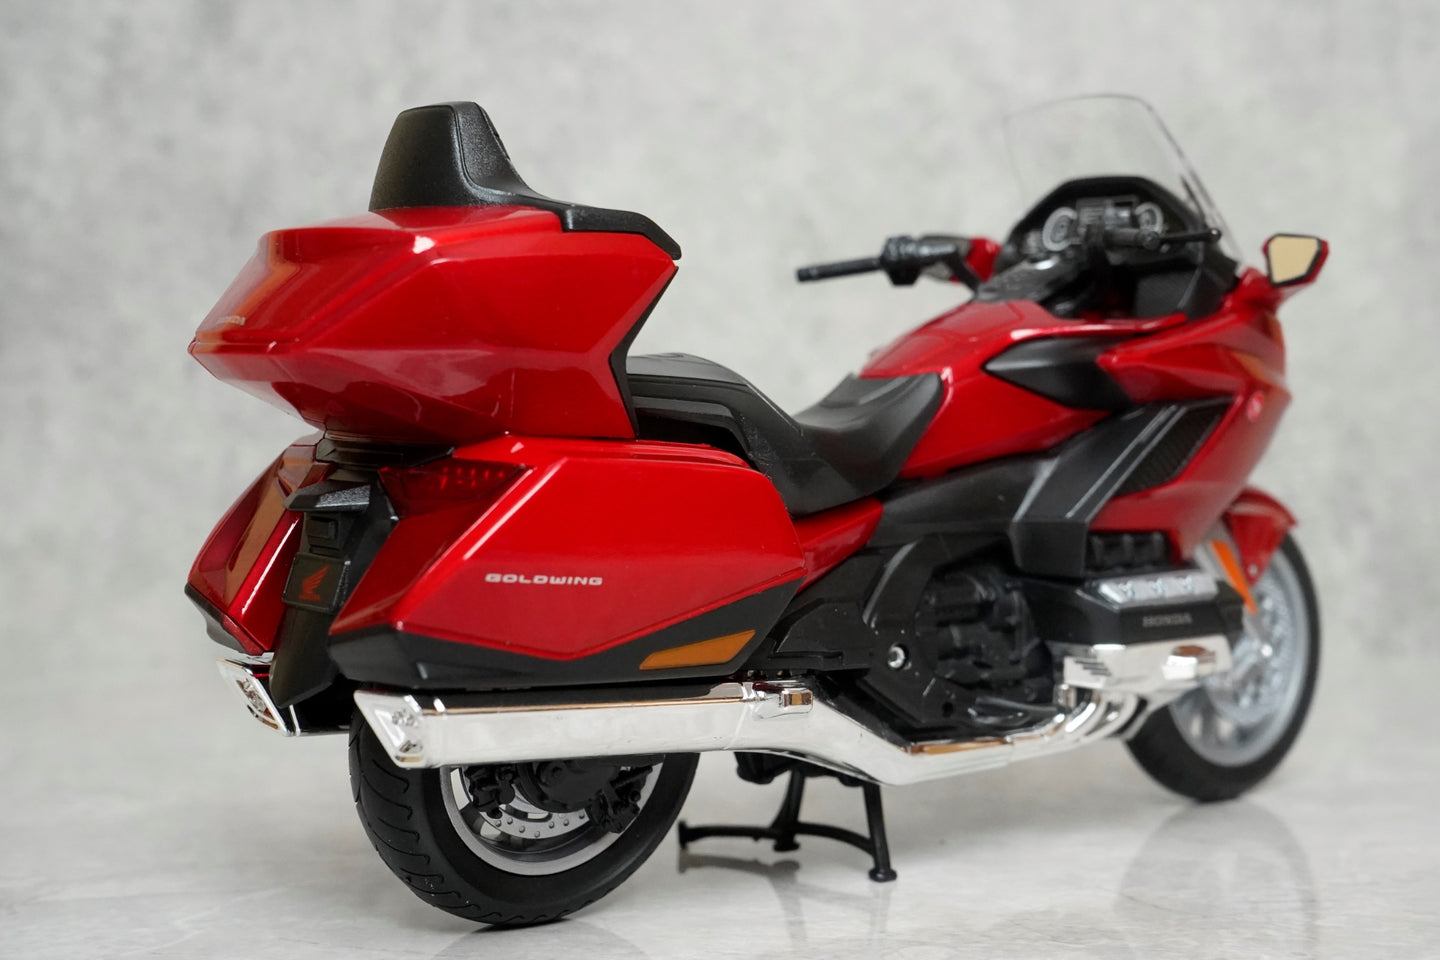 2020 Honda Gold Wing Tour Diecast Bike 1:12 Motorcycle Model By Welly